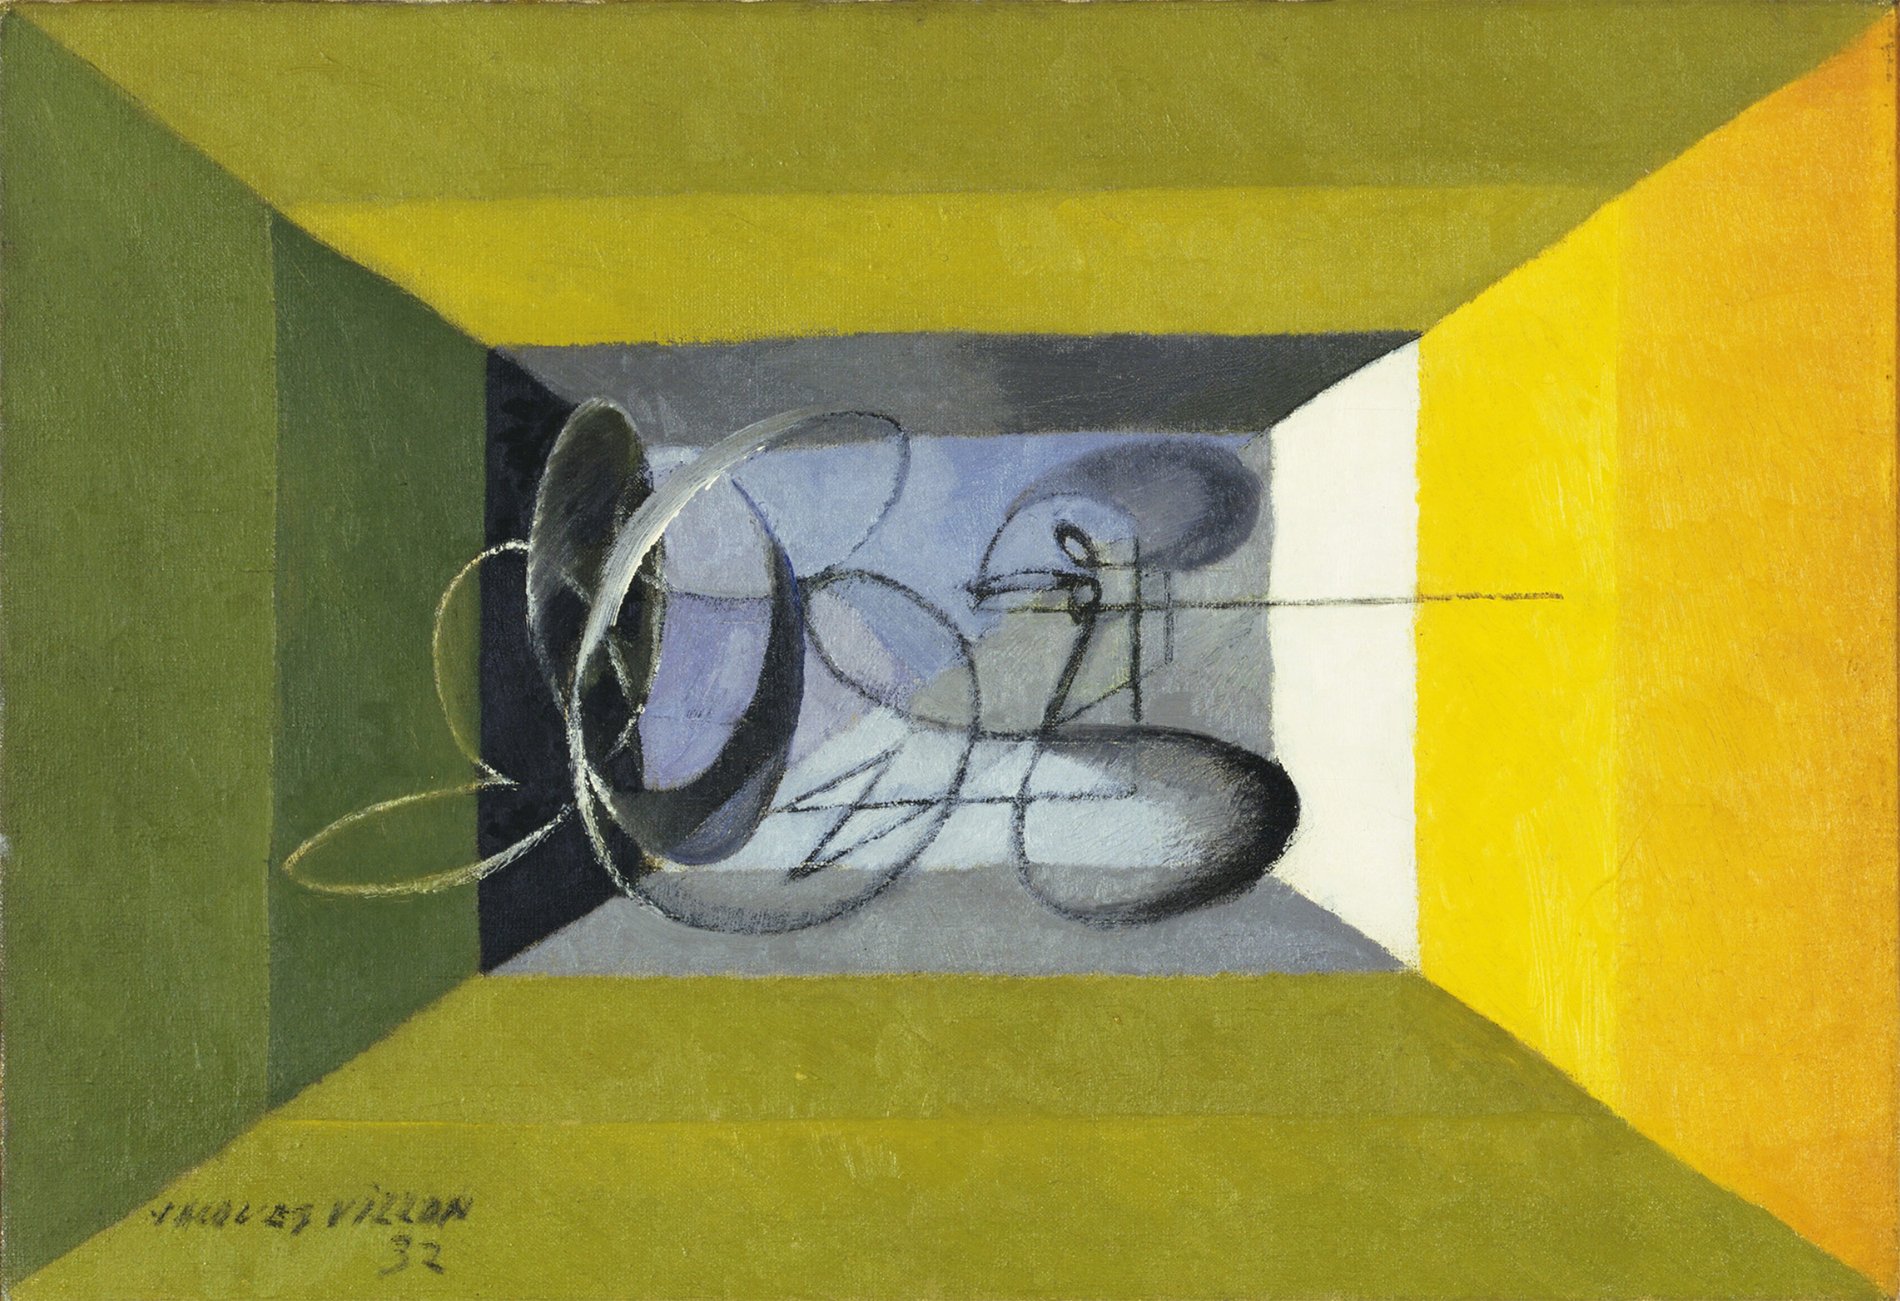 "Dance" by Jacques Villon, 1932, an abstract painting featuring a central geometric tunnel-like form with surrounding angular shapes in green and yellow, creating an illusion of depth and movement.